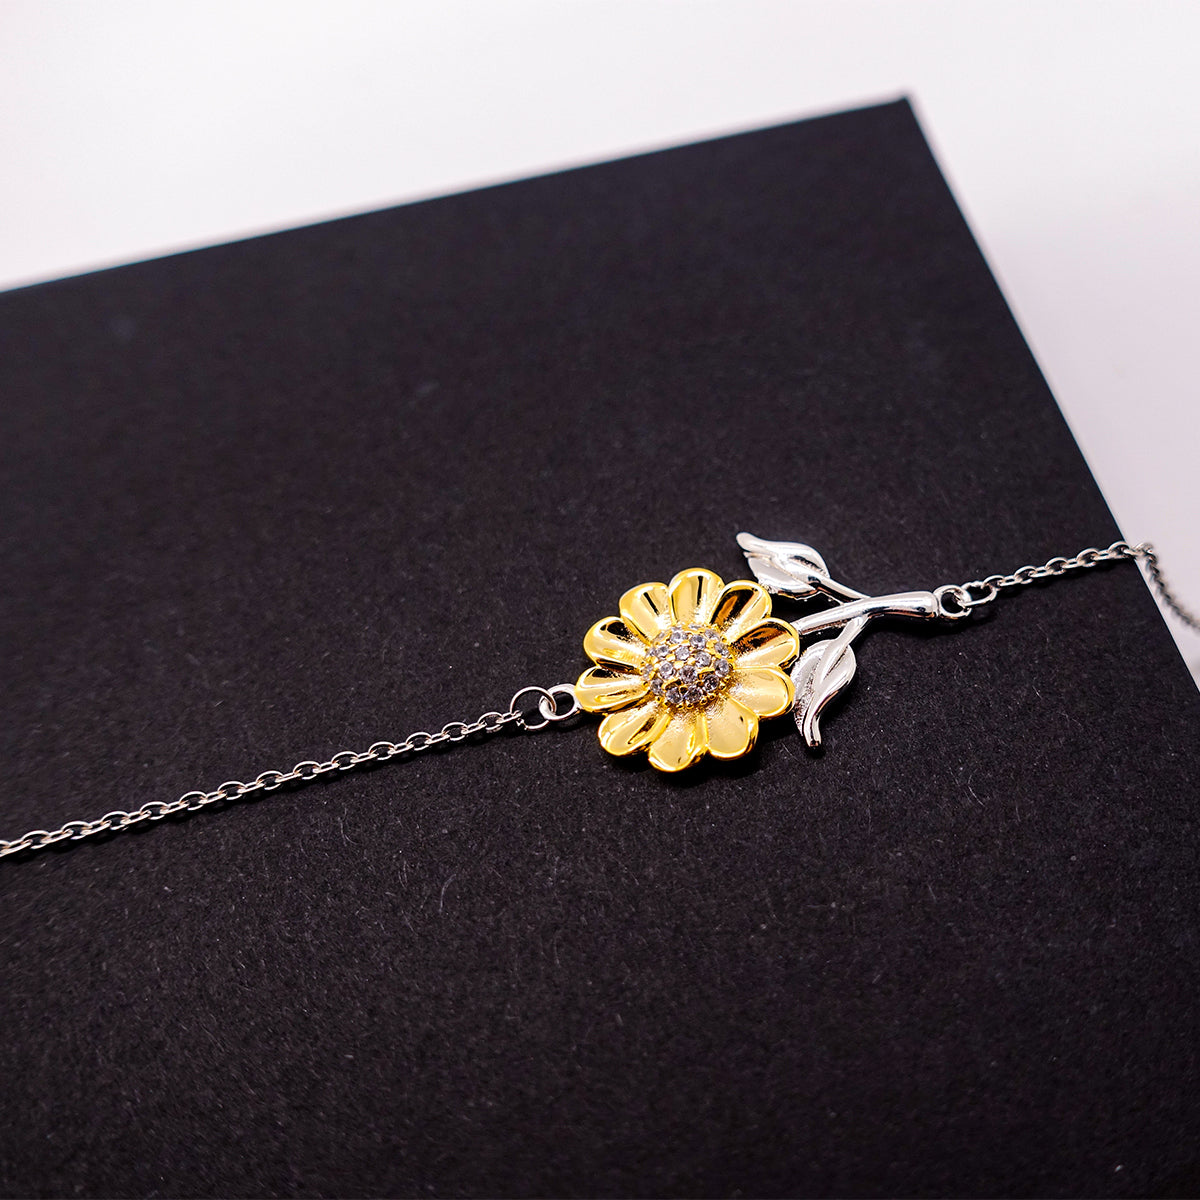 Appropriate Nonna Sunflower Bracelet Epic Birthday Gifts for Nonna Thank you for being such an important piece of my life Nonna Christmas Mothers Fathers Day